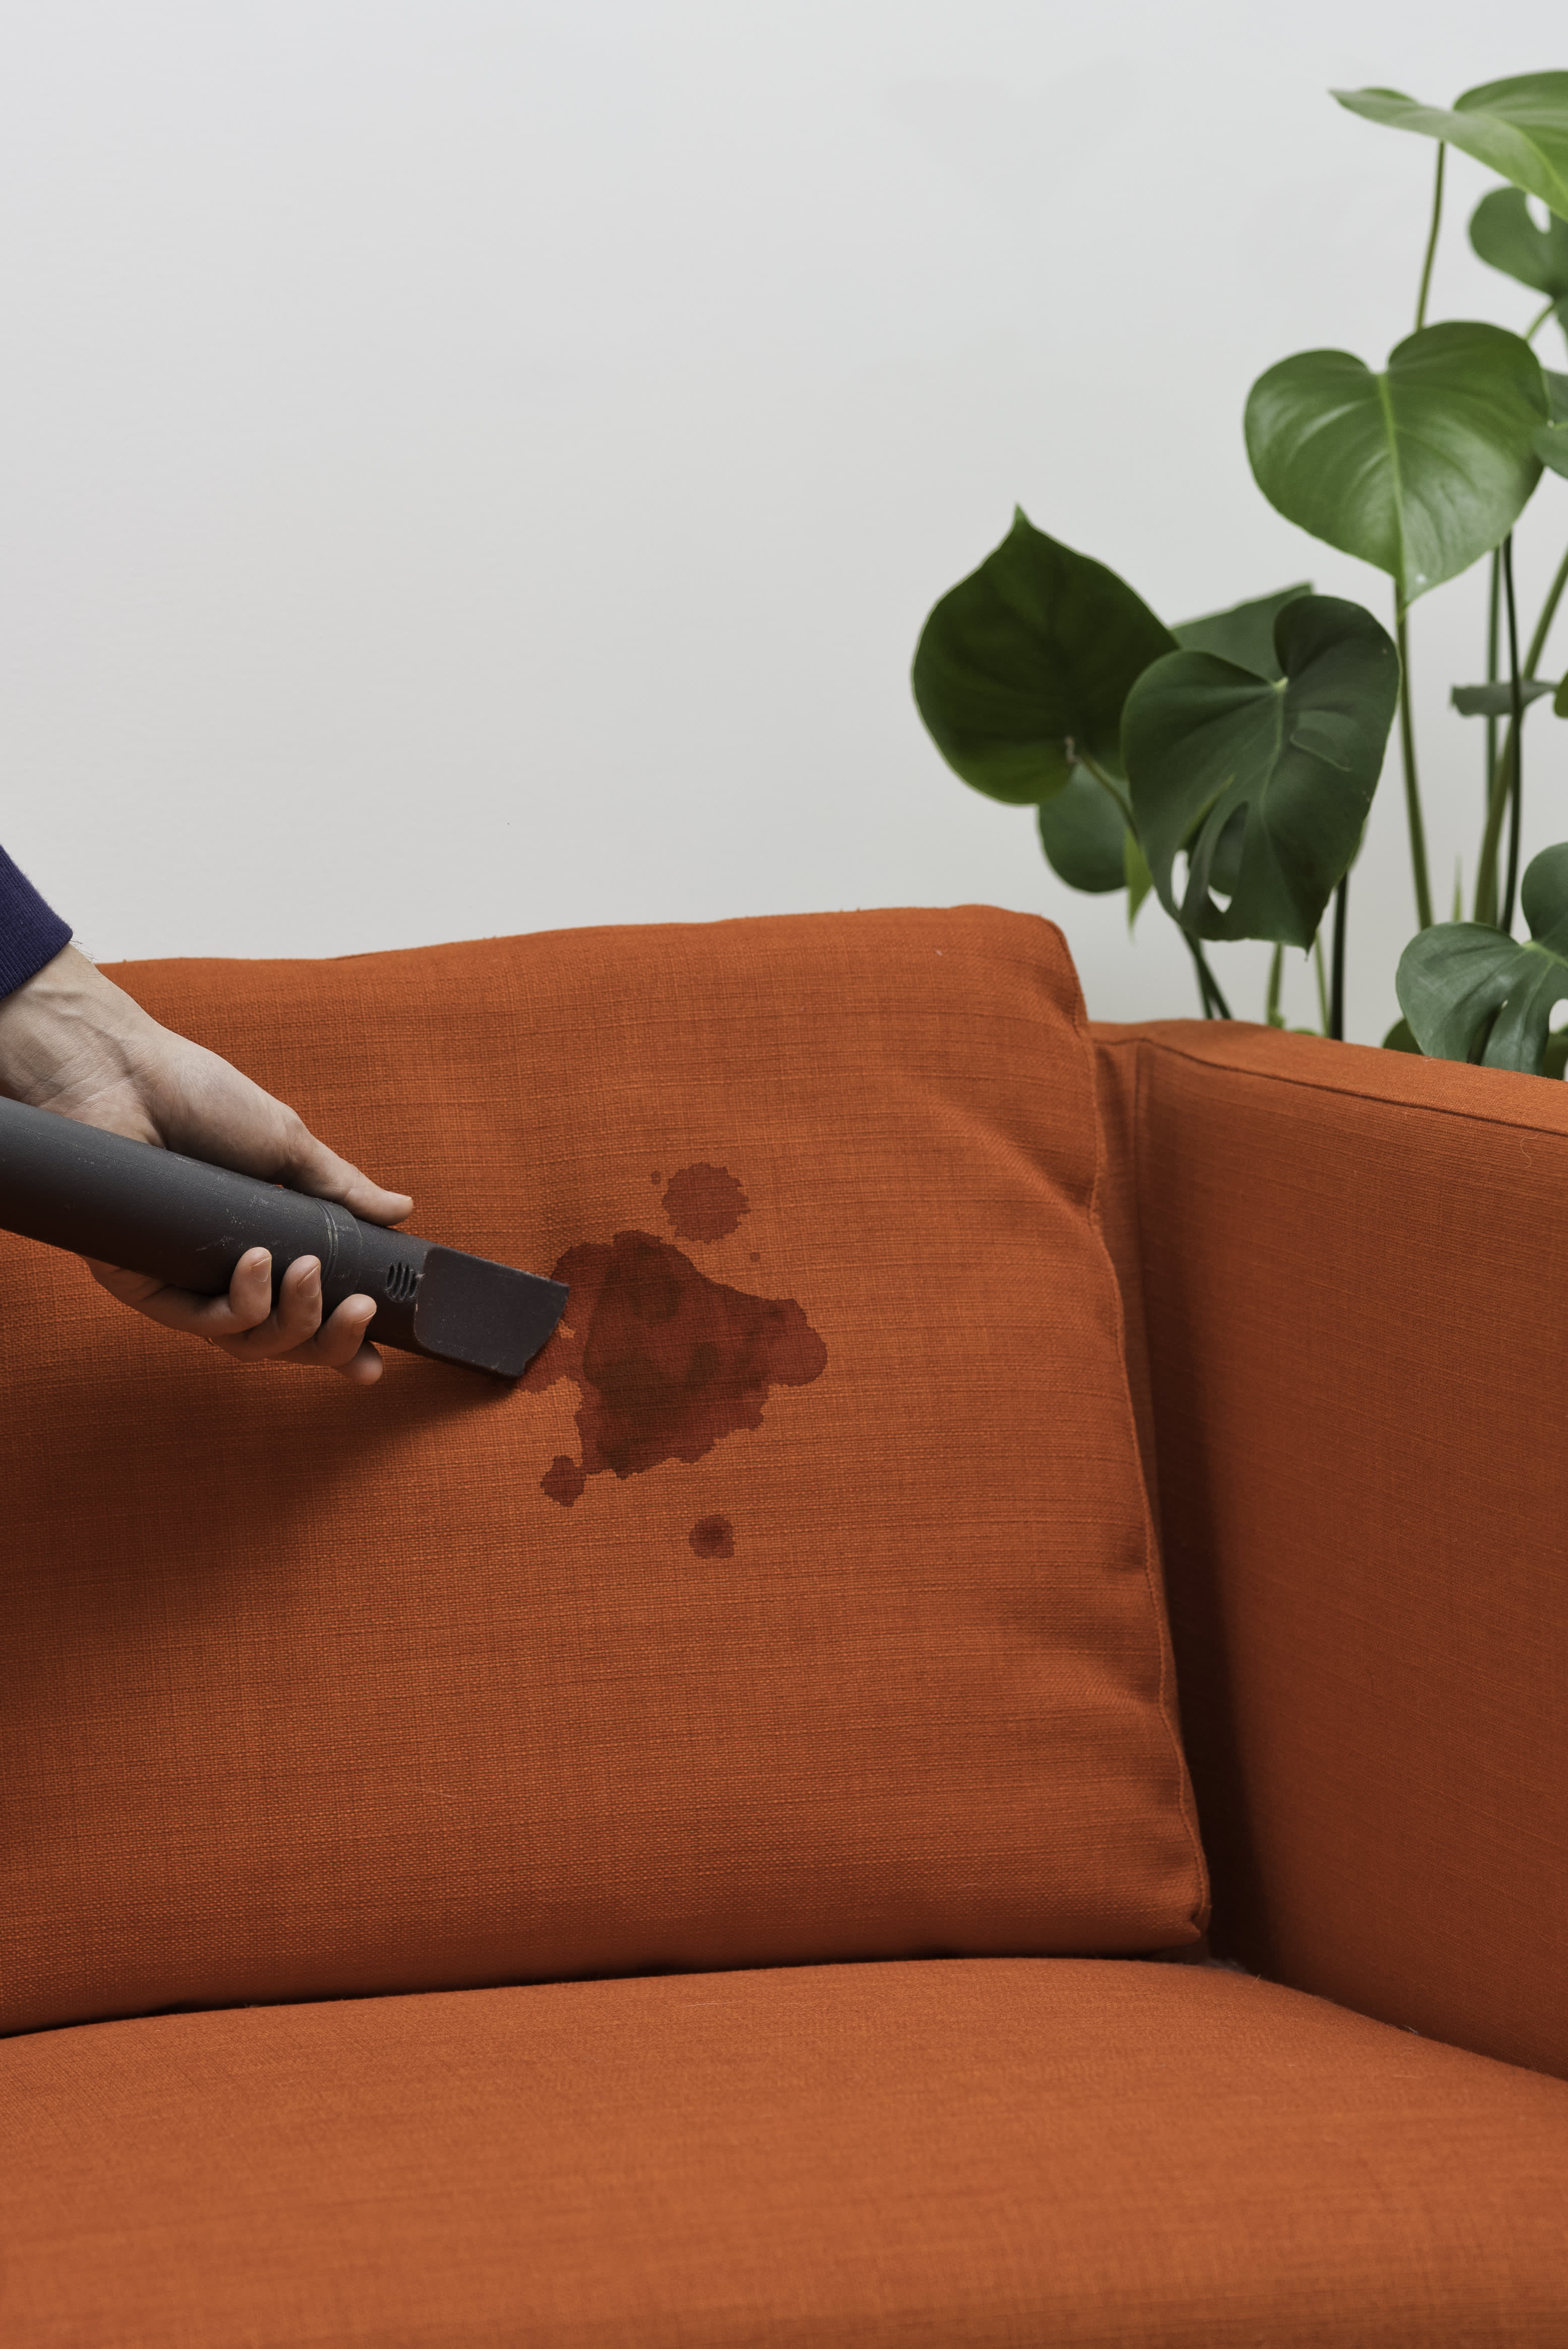 Upholstery Cleaning - How to Remove Blood Stains From Your Sofa